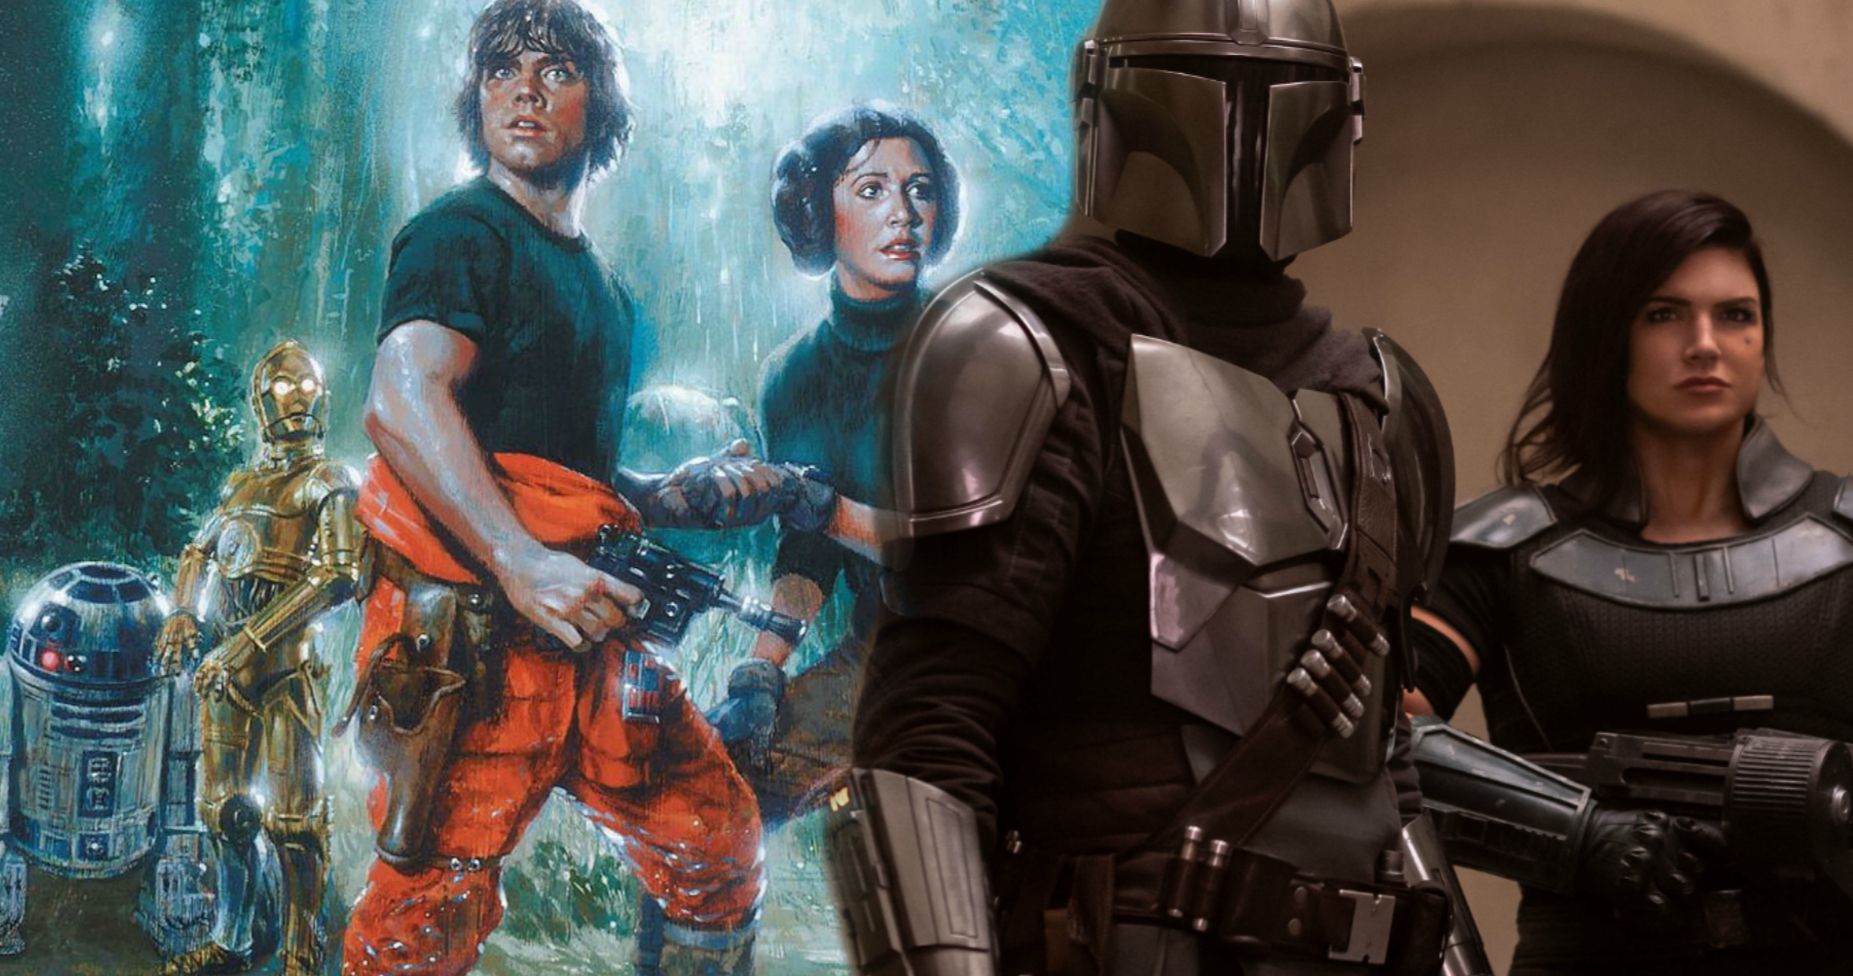 Will Taika Waititi Go from Directing The Mandalorian to a Full-On Star Wars Movie?